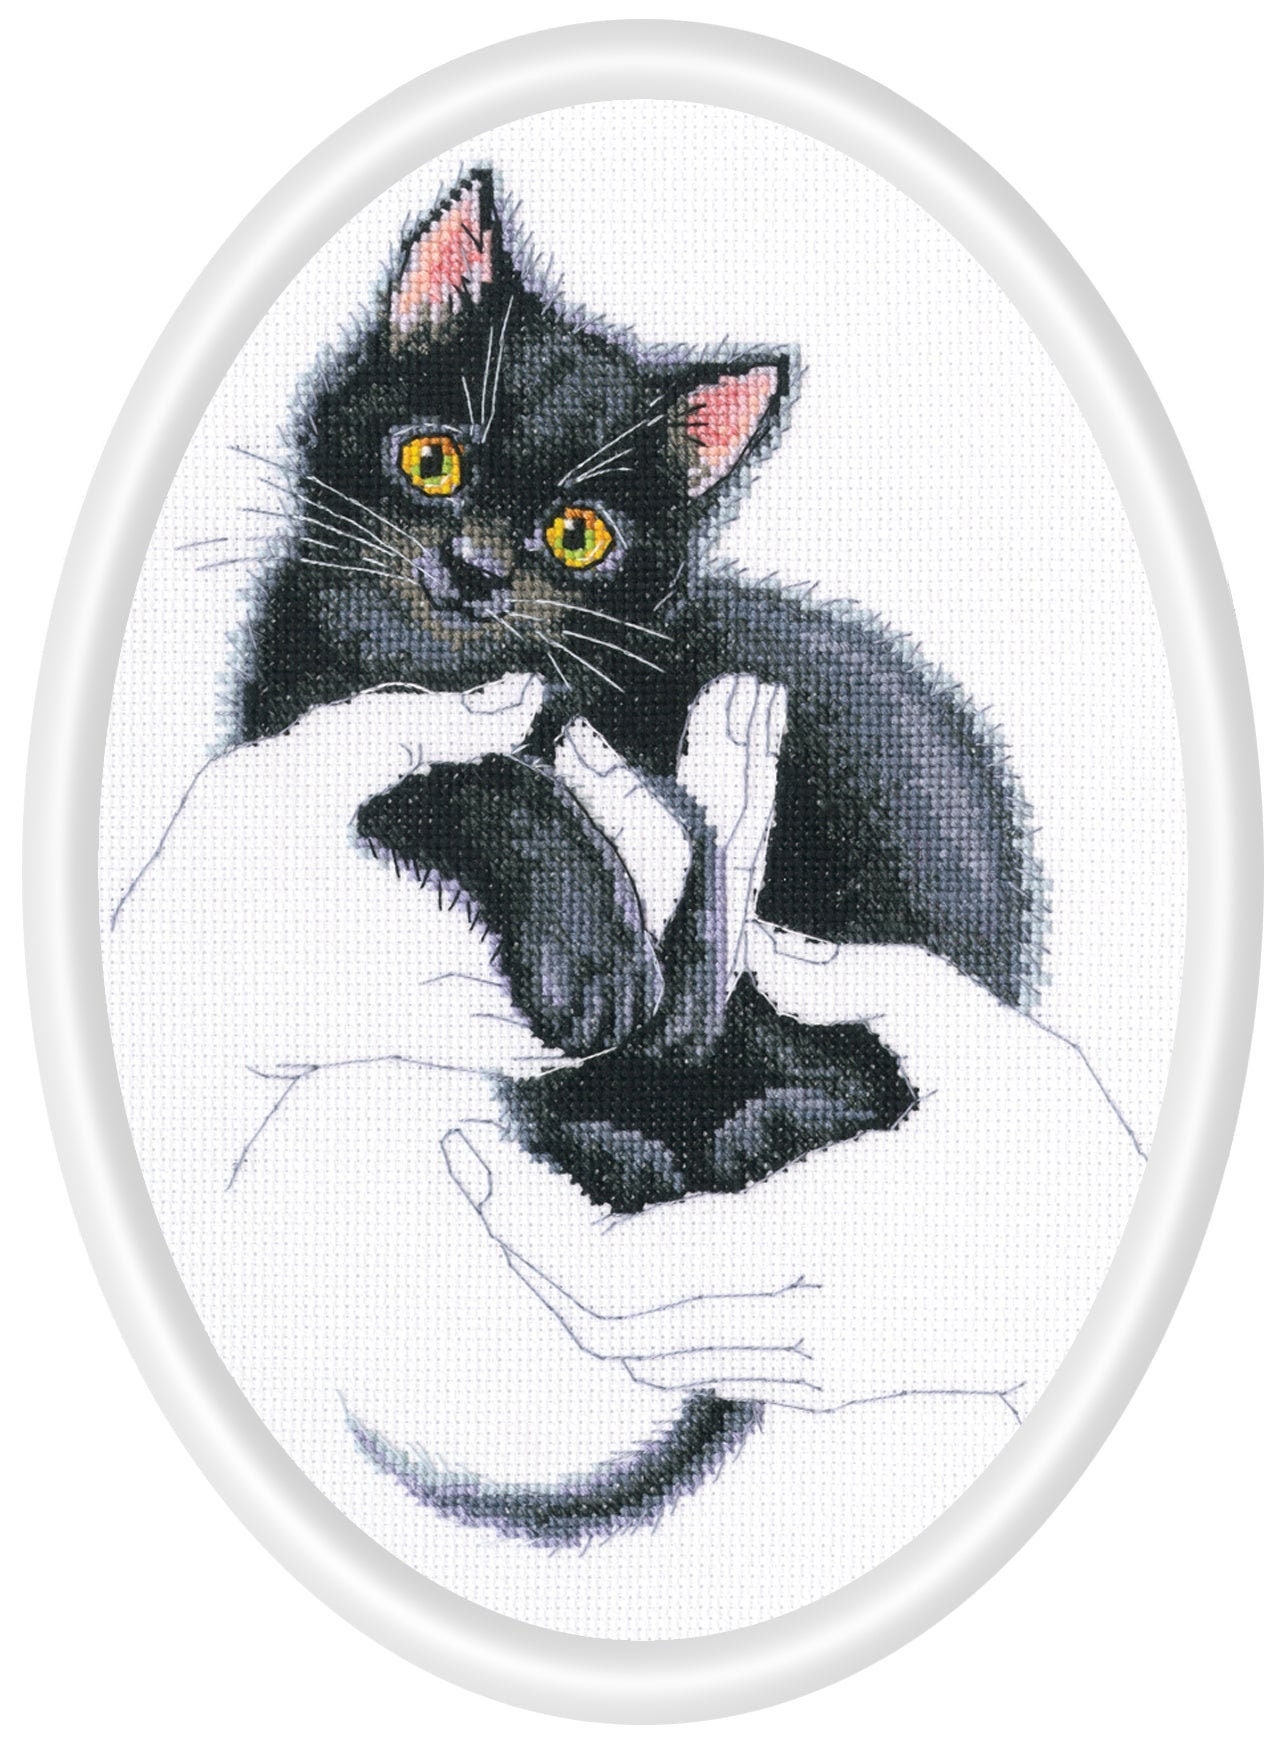 Black Dog and Cat Series Aida Fabric Cross Stitch Kit Counted Printed  Canvas Stitches DMC Cotton